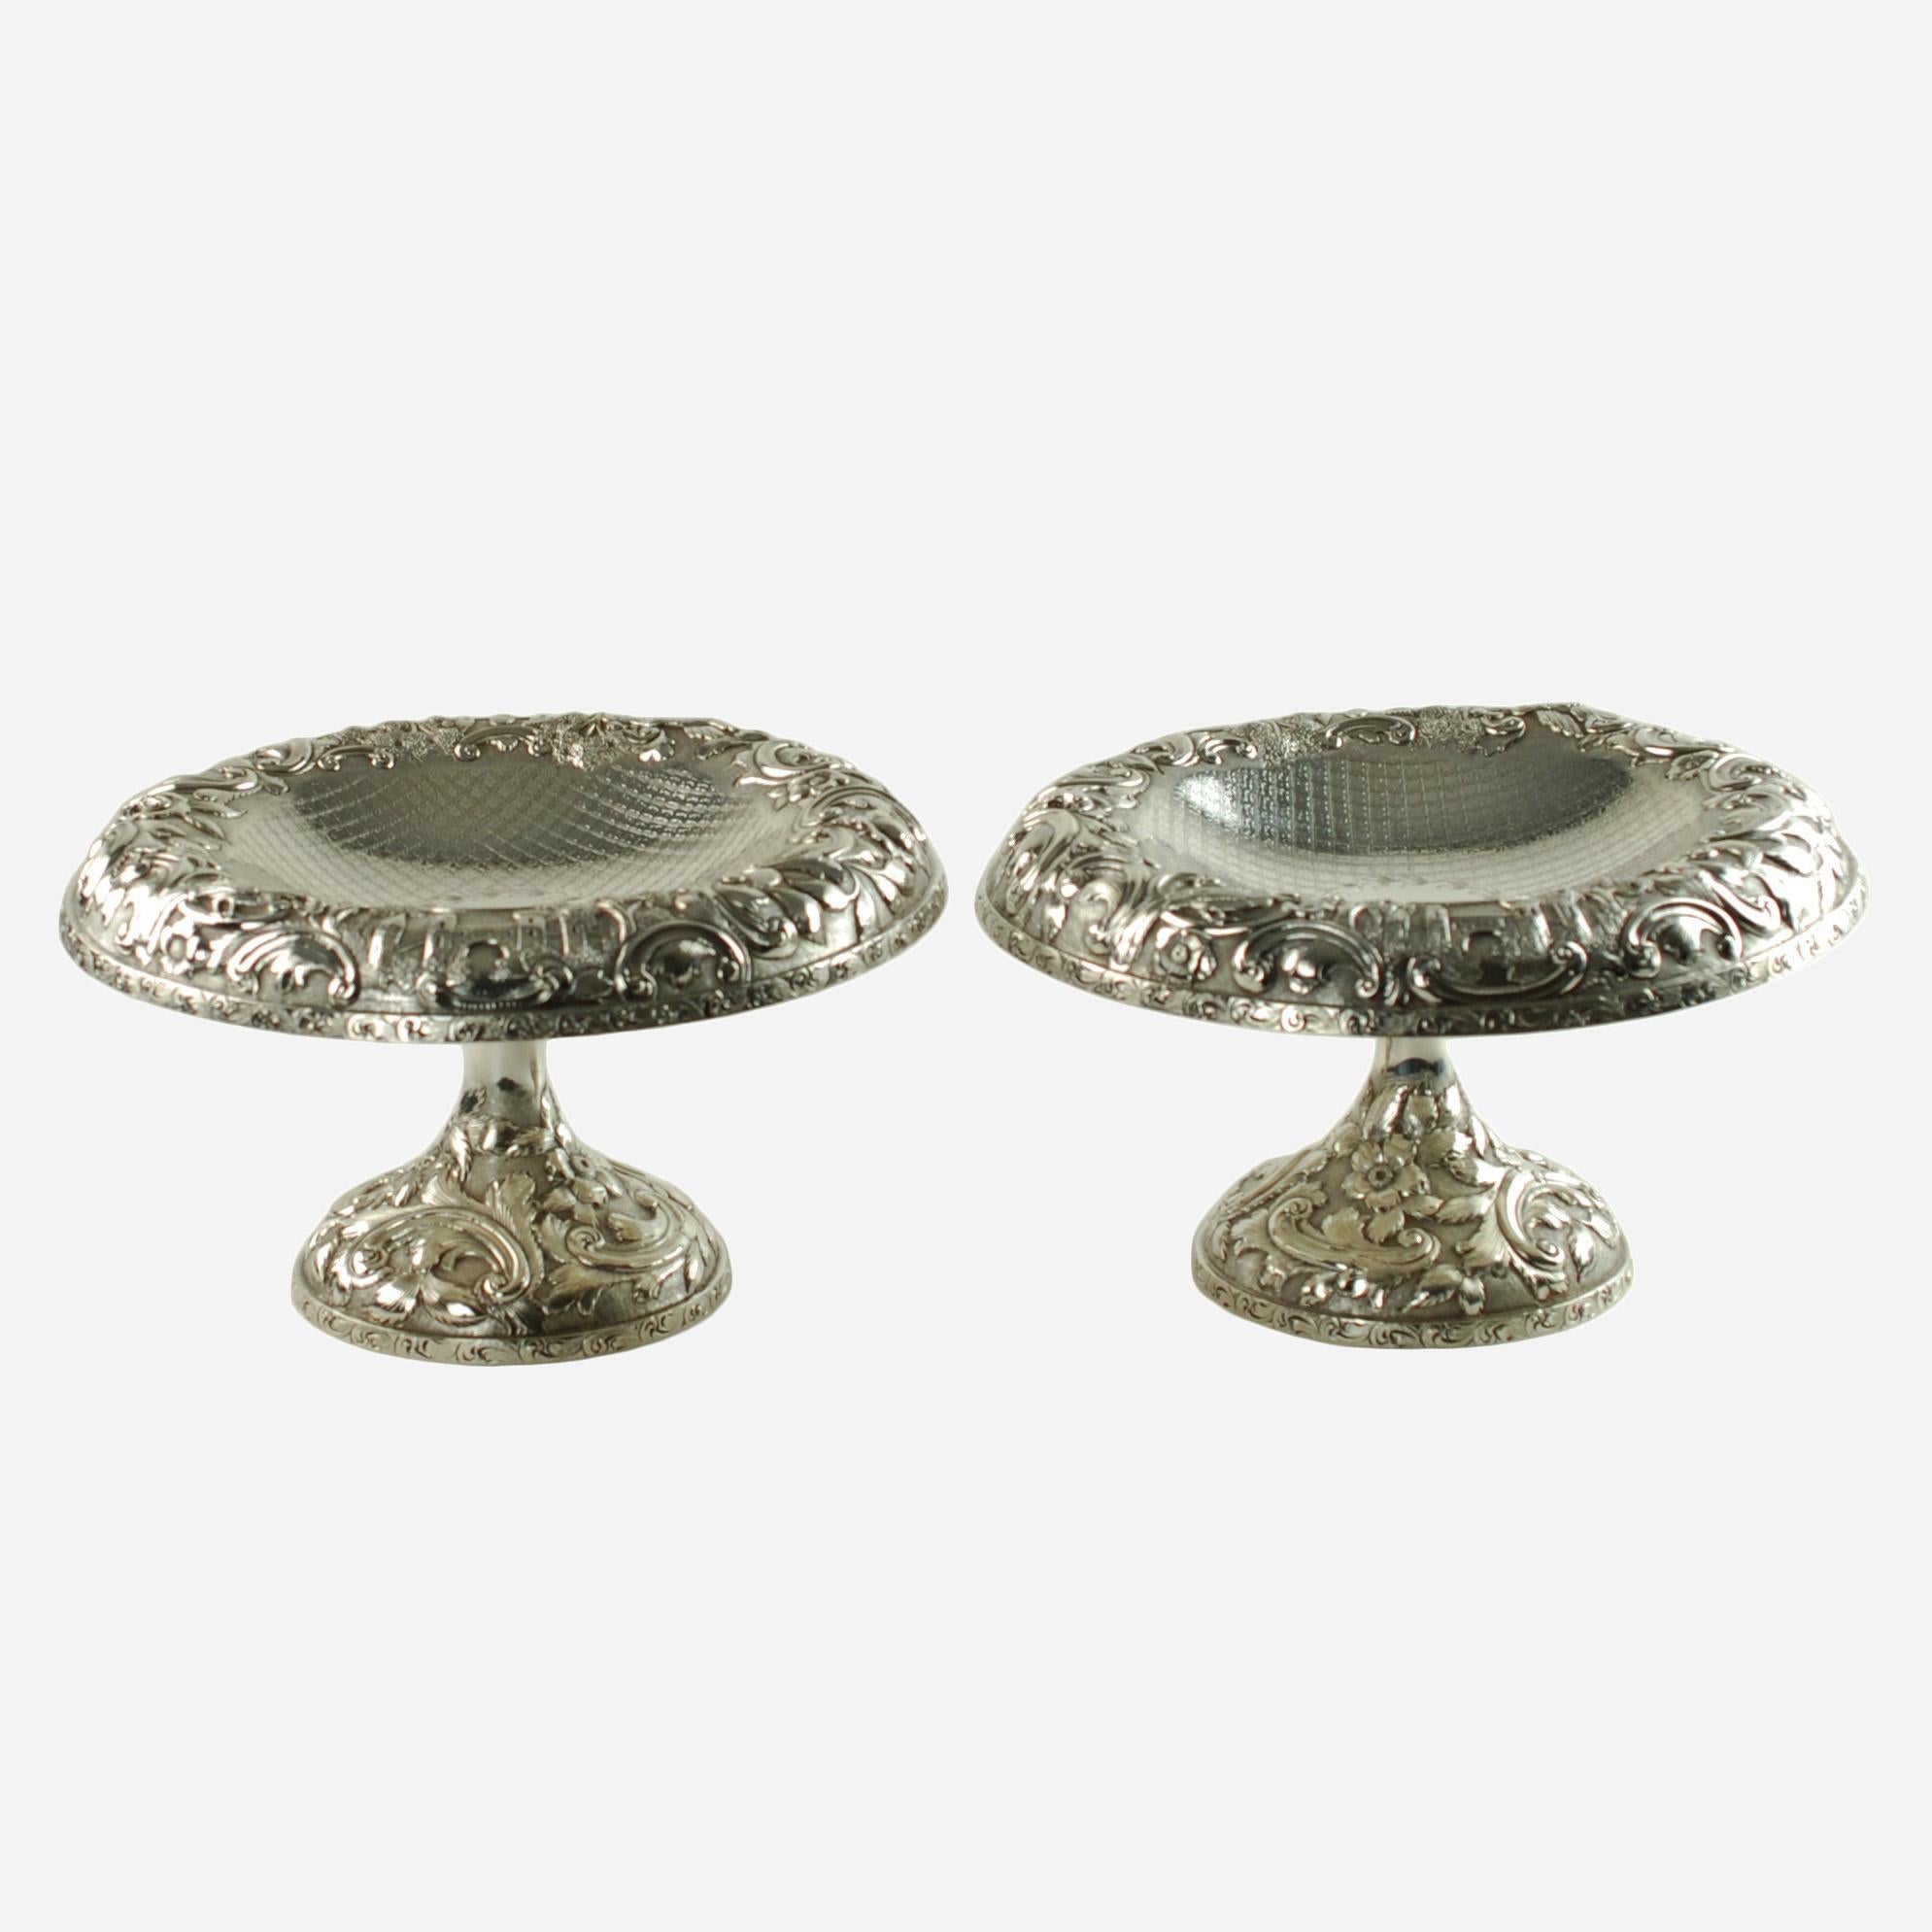 This unusual matched pair of sterling silver tazzas were made by the Baltimore Silversmiths Manufacturing Company, founded in 1903 by Frank M. Schofield. The tazzas have been finished in the elegant Castle Landscape pattern and feature ornate